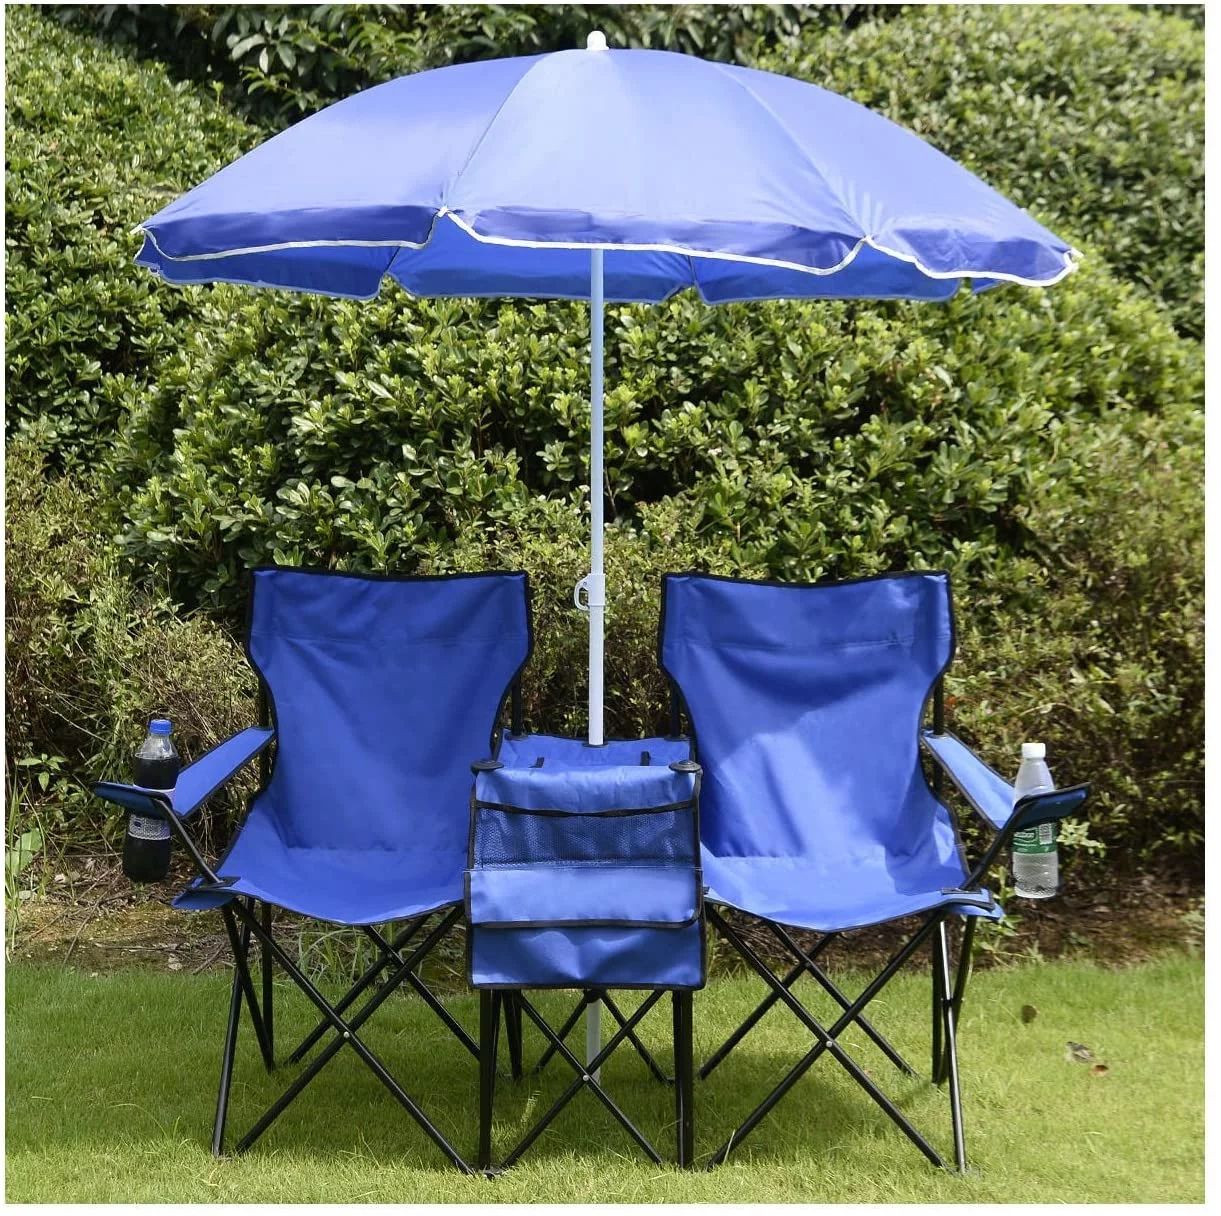 Portable Camping Chairs, Steel Construction Folding Chair w/ Removable Umbrella, Table Cooler Bag... | Walmart (US)